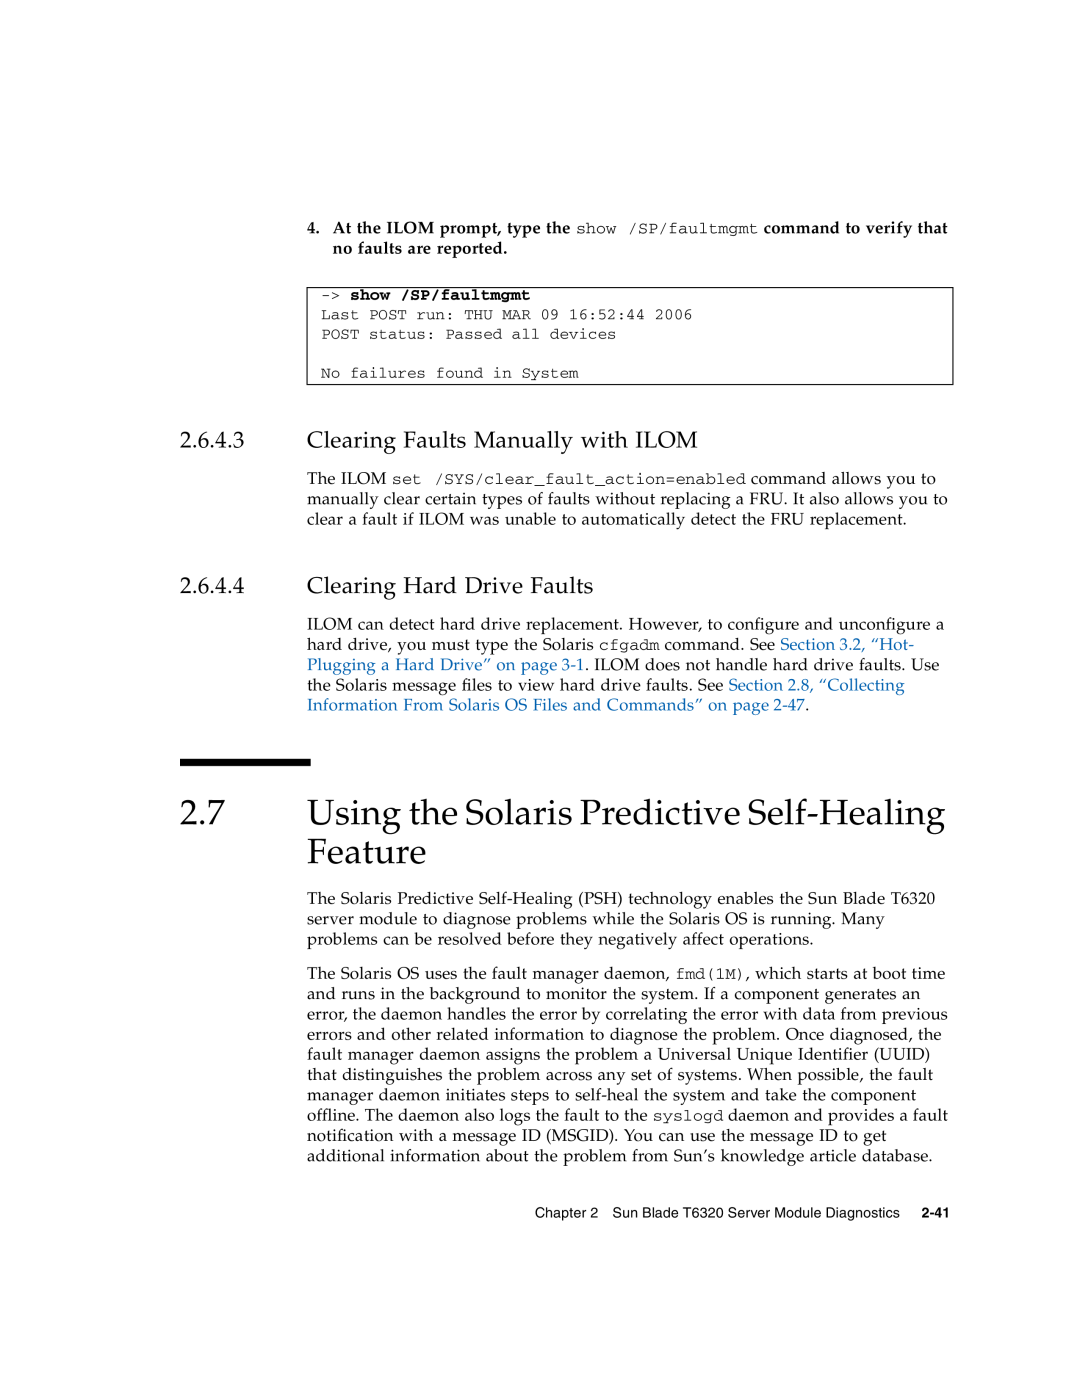 Sun Microsystems T6320 service manual Using the Solaris Predictive Self-Healing Feature, Clearing Faults Manually with ILOM 